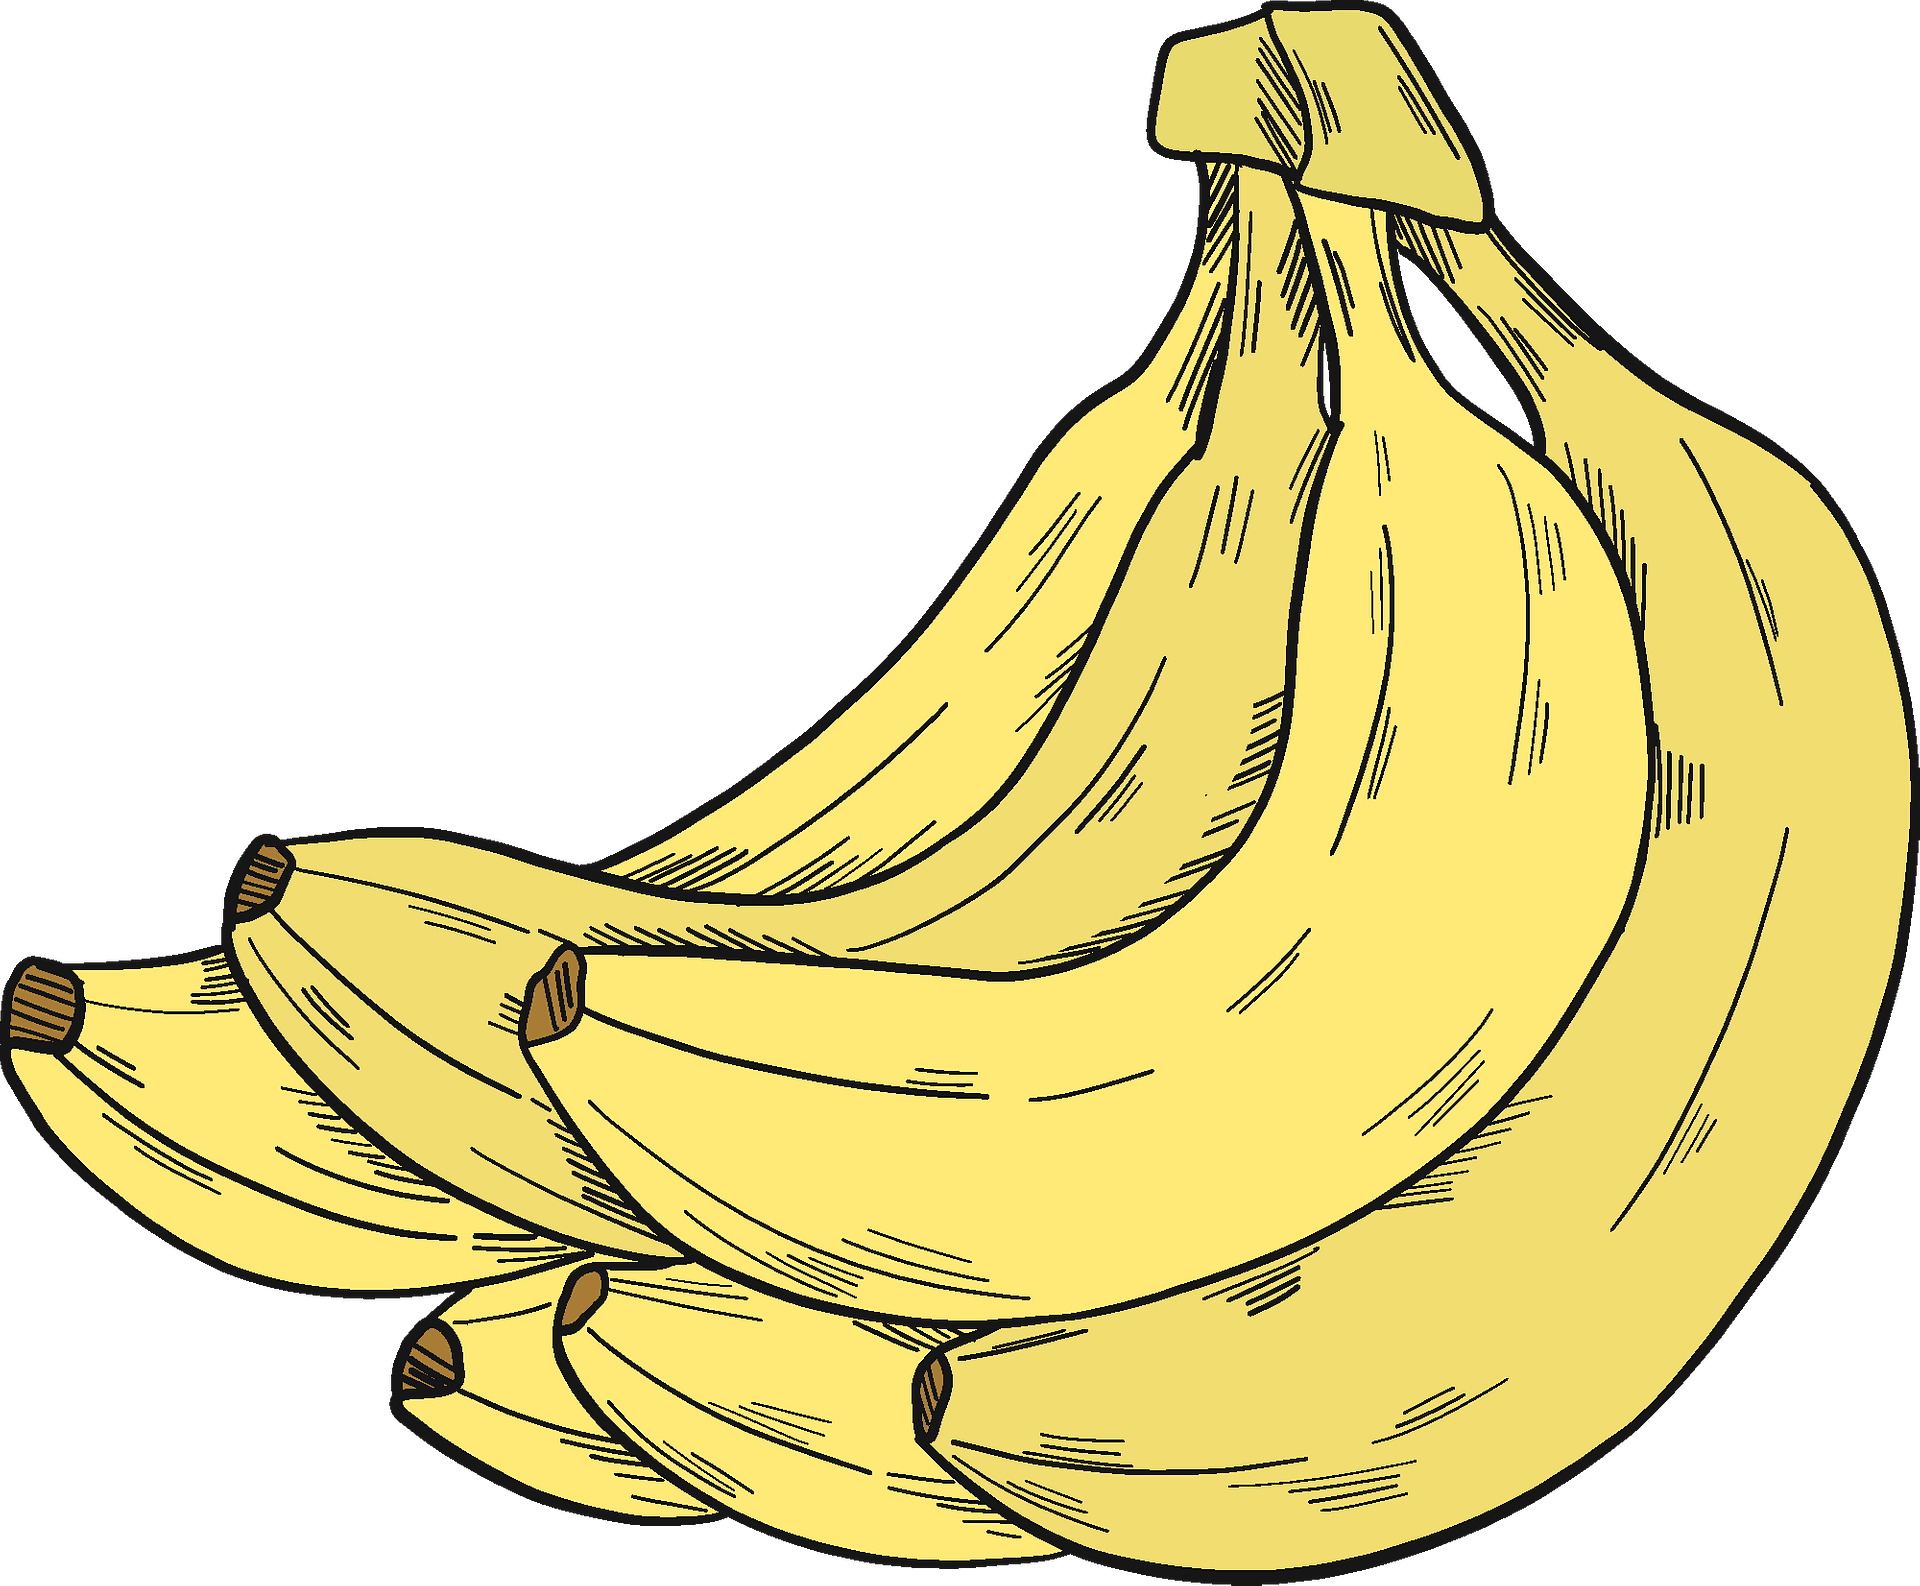 Bananas clipart image bunch of yellow bananas including one that - Clip ...